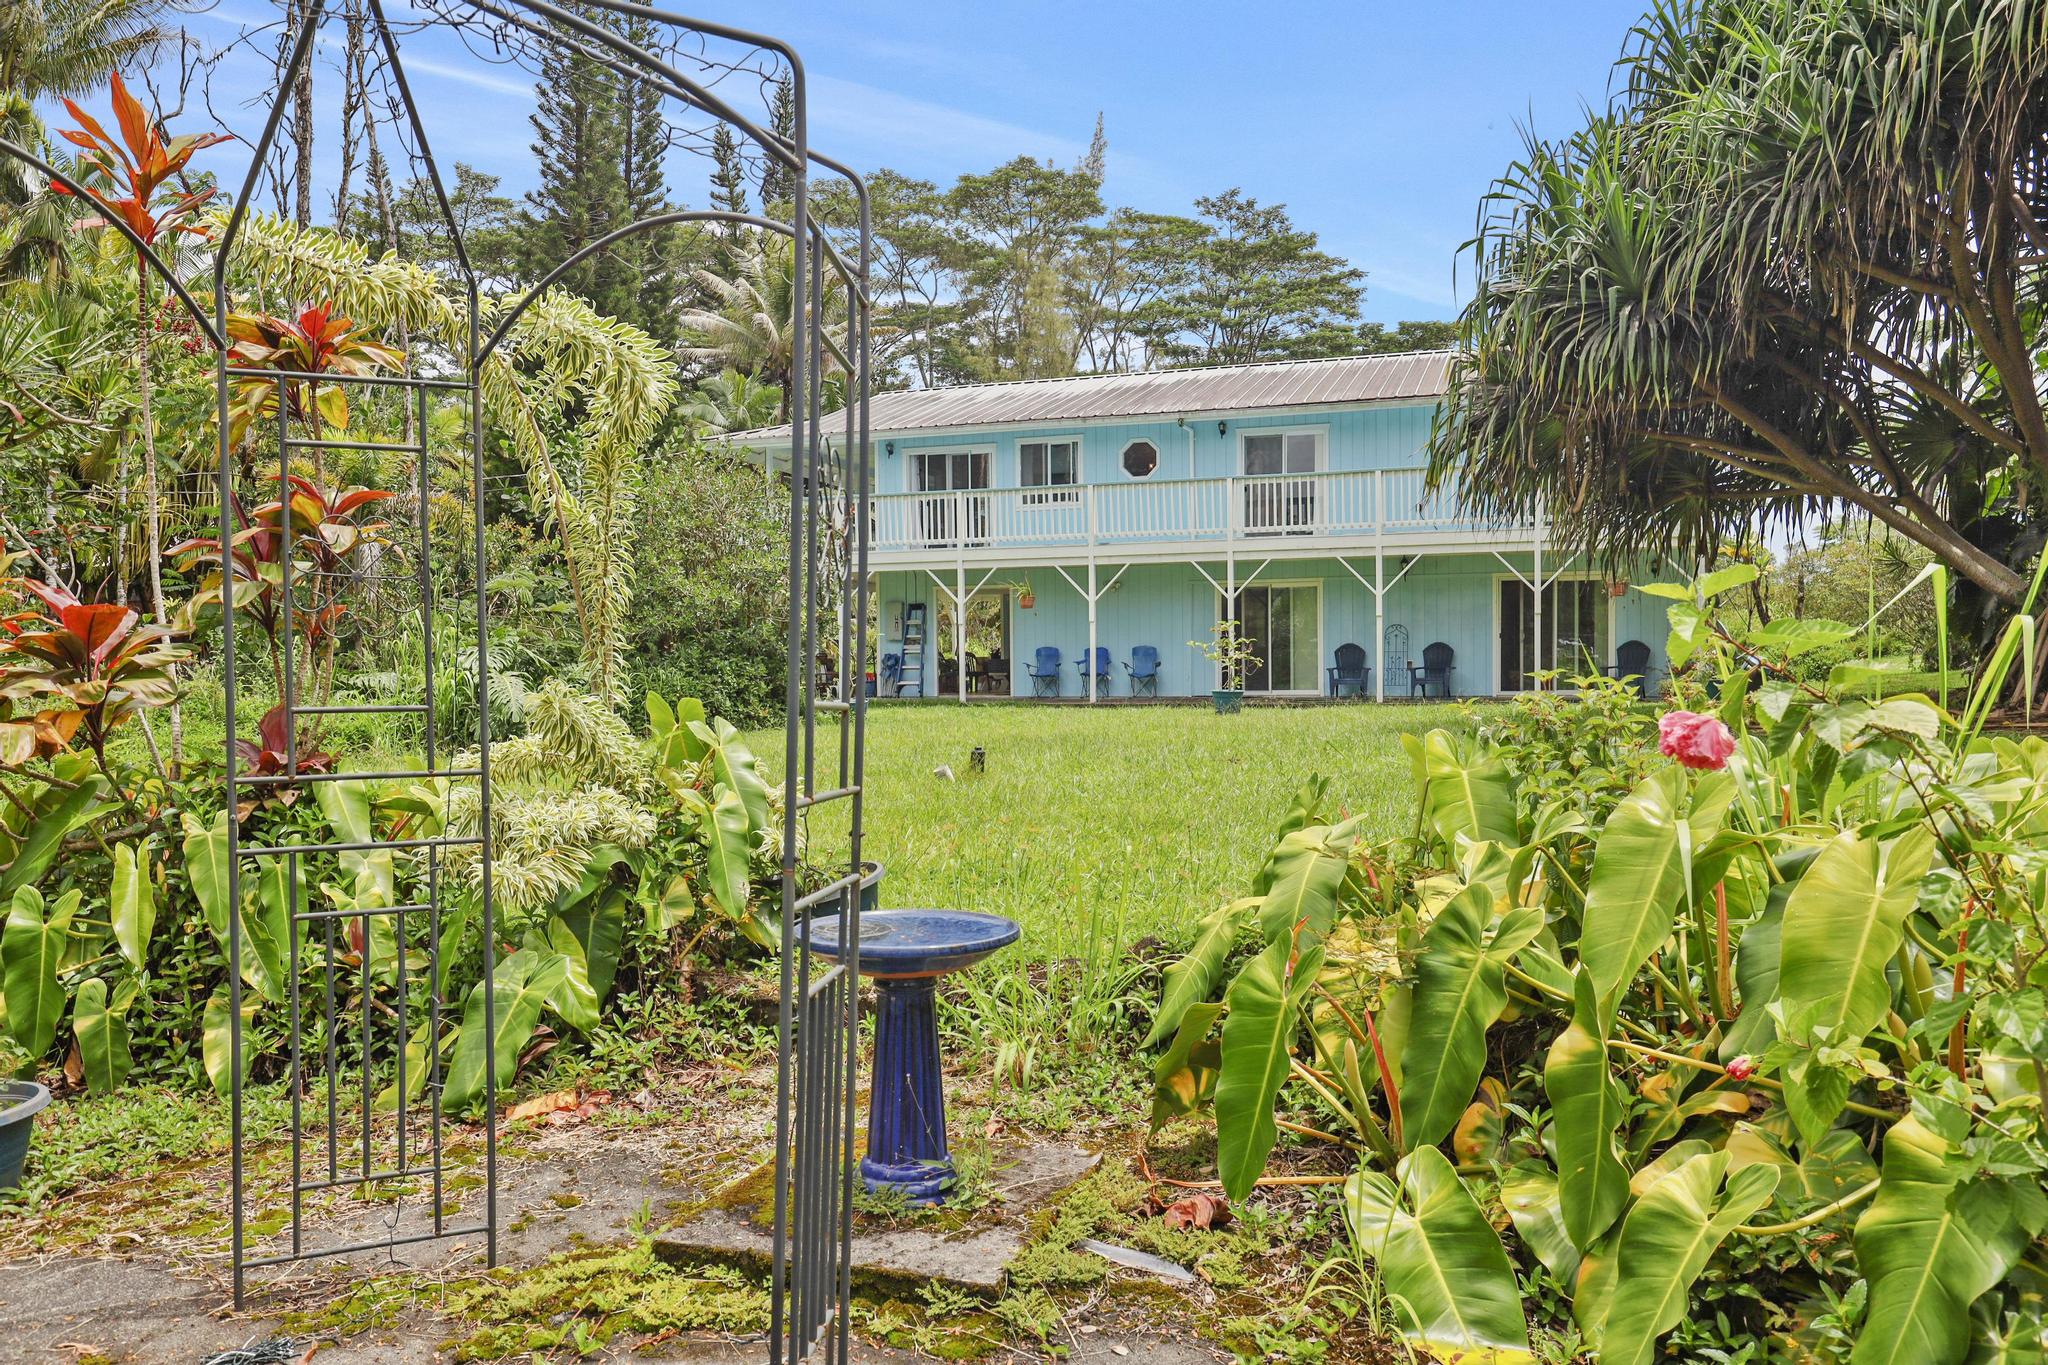 Multi-family home on one acre in Hawaiian Paradise Park.
Offered fully furnished.